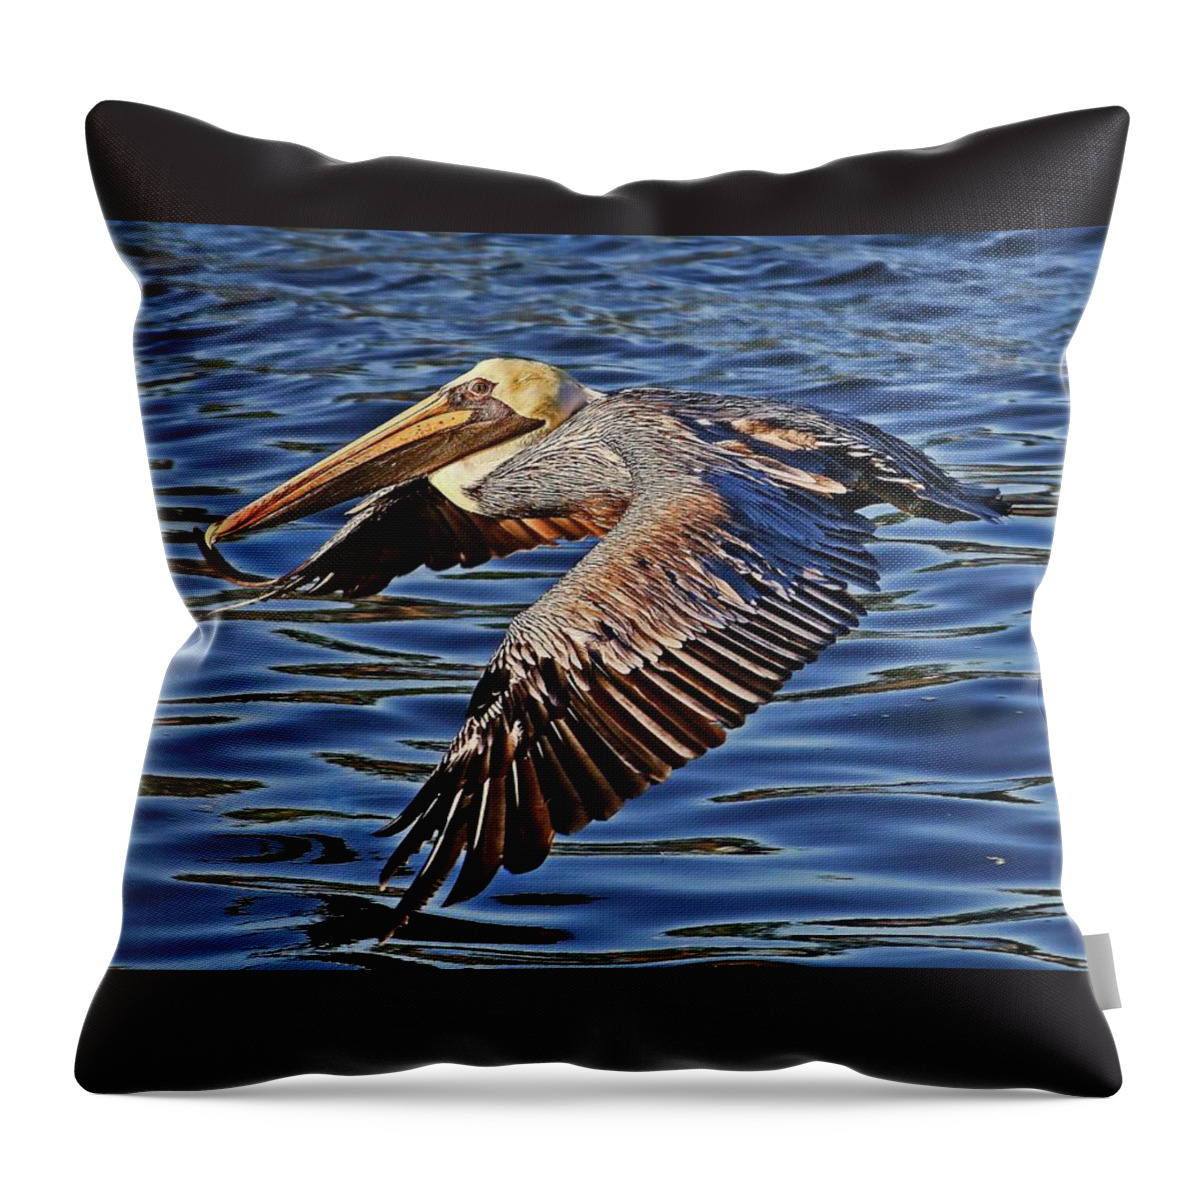 Diving Birds Throw Pillow featuring the photograph Flight School by HH Photography of Florida